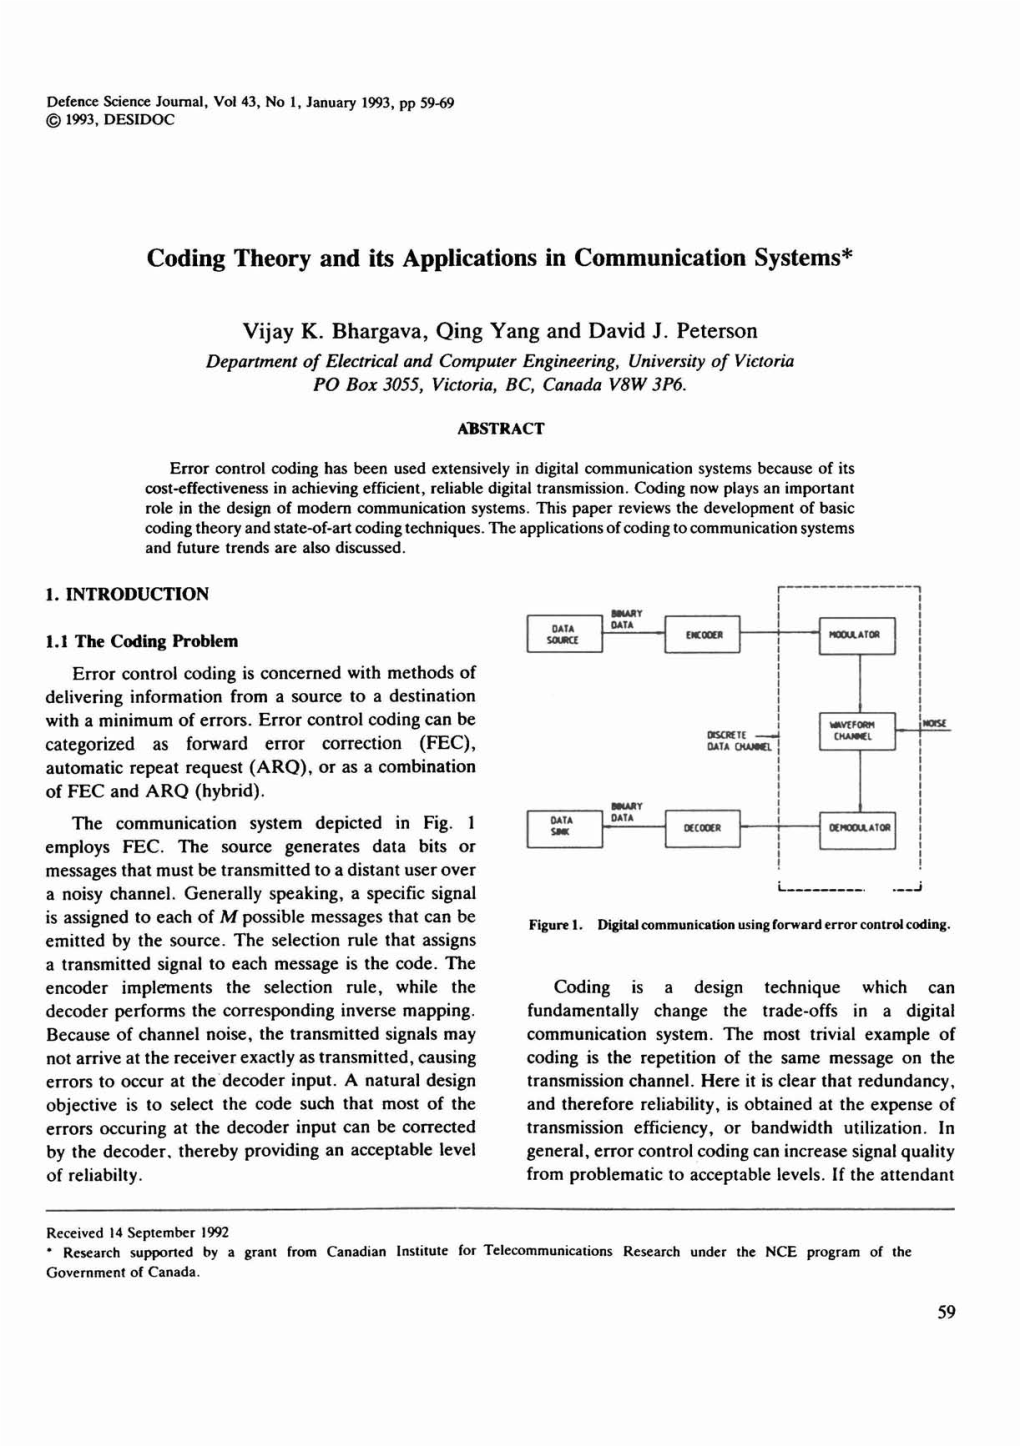 Coding Theory and Its Applications in Communication Systems* R